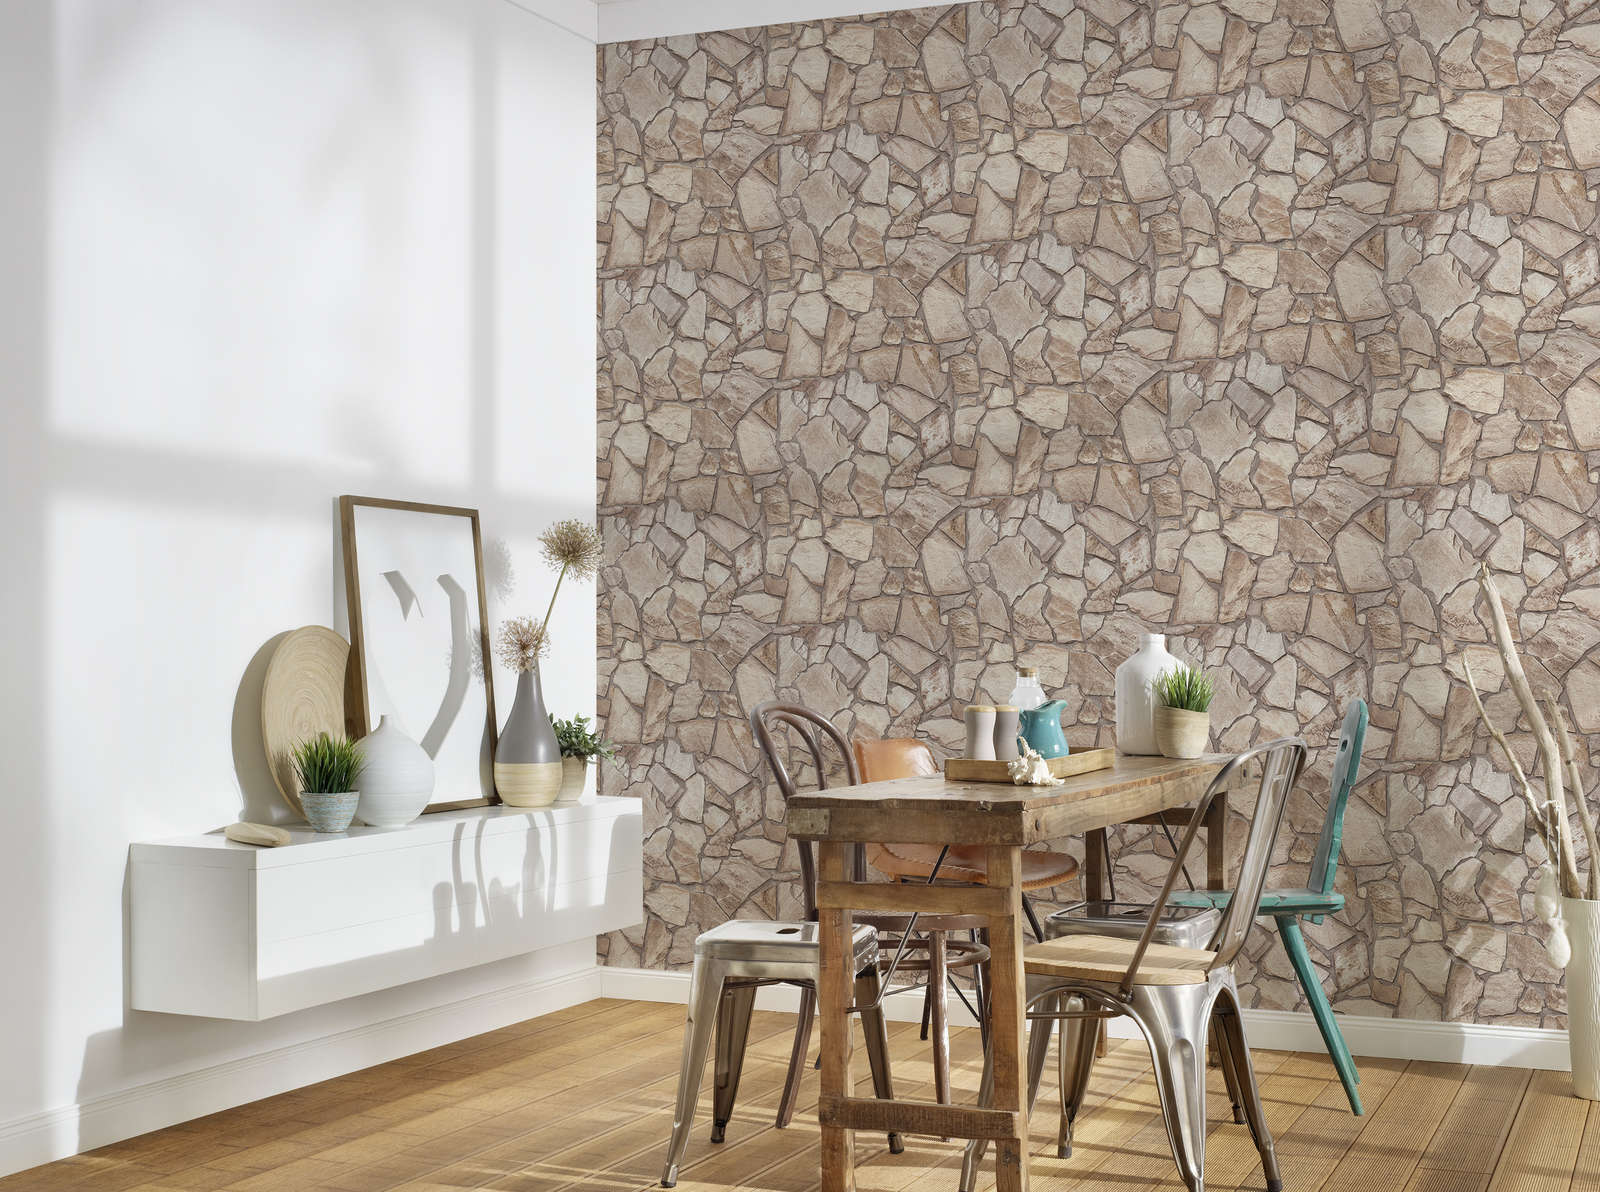             Non-woven wallpaper with stone look wall - brown, grey, beige
        